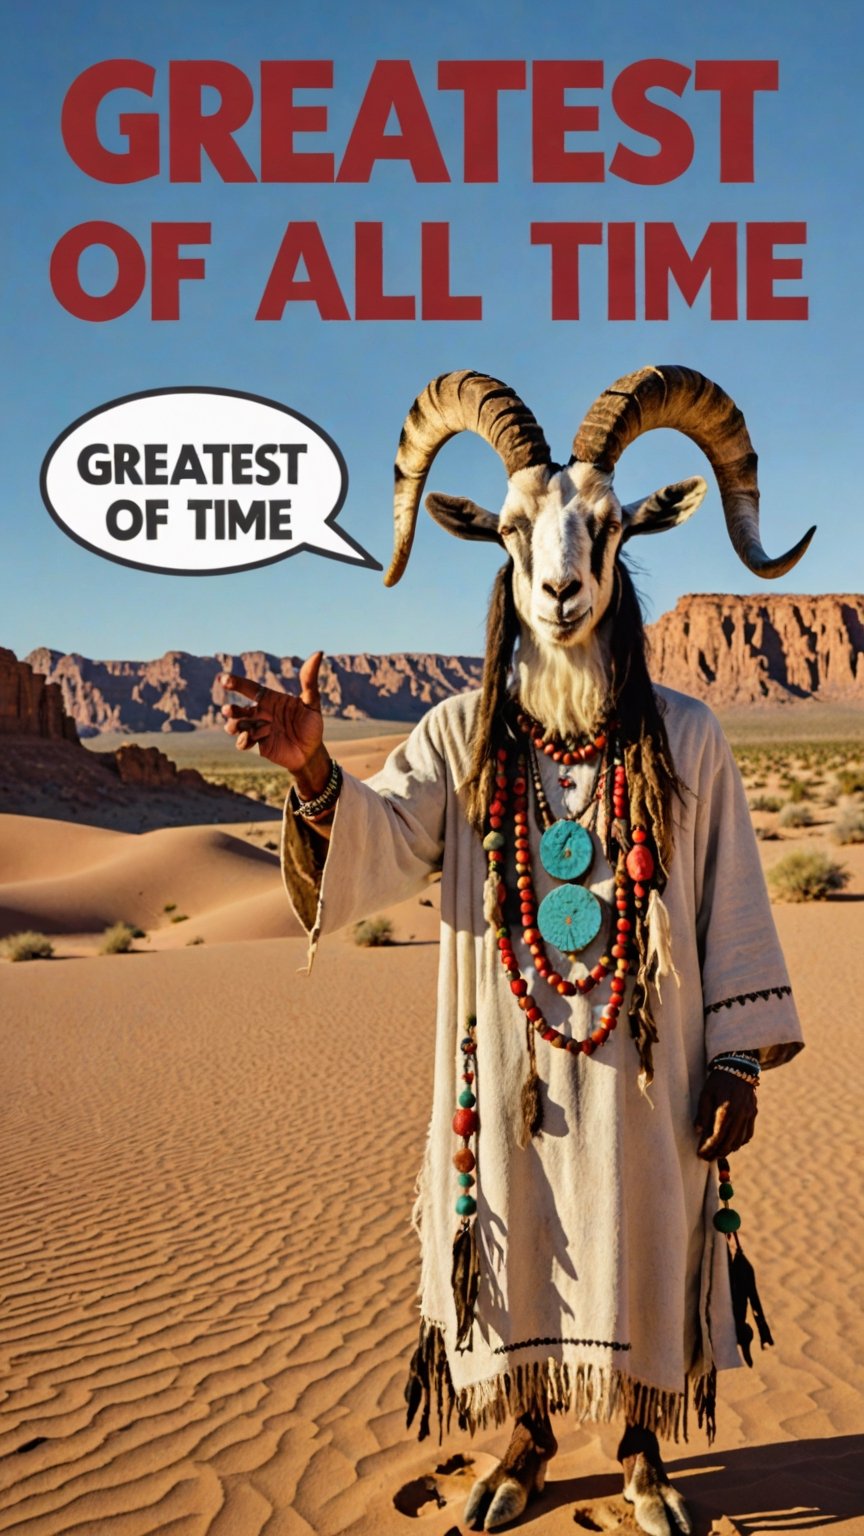 Photo of holy goat man shaman in desert with text bubble that says "greatest of all time"